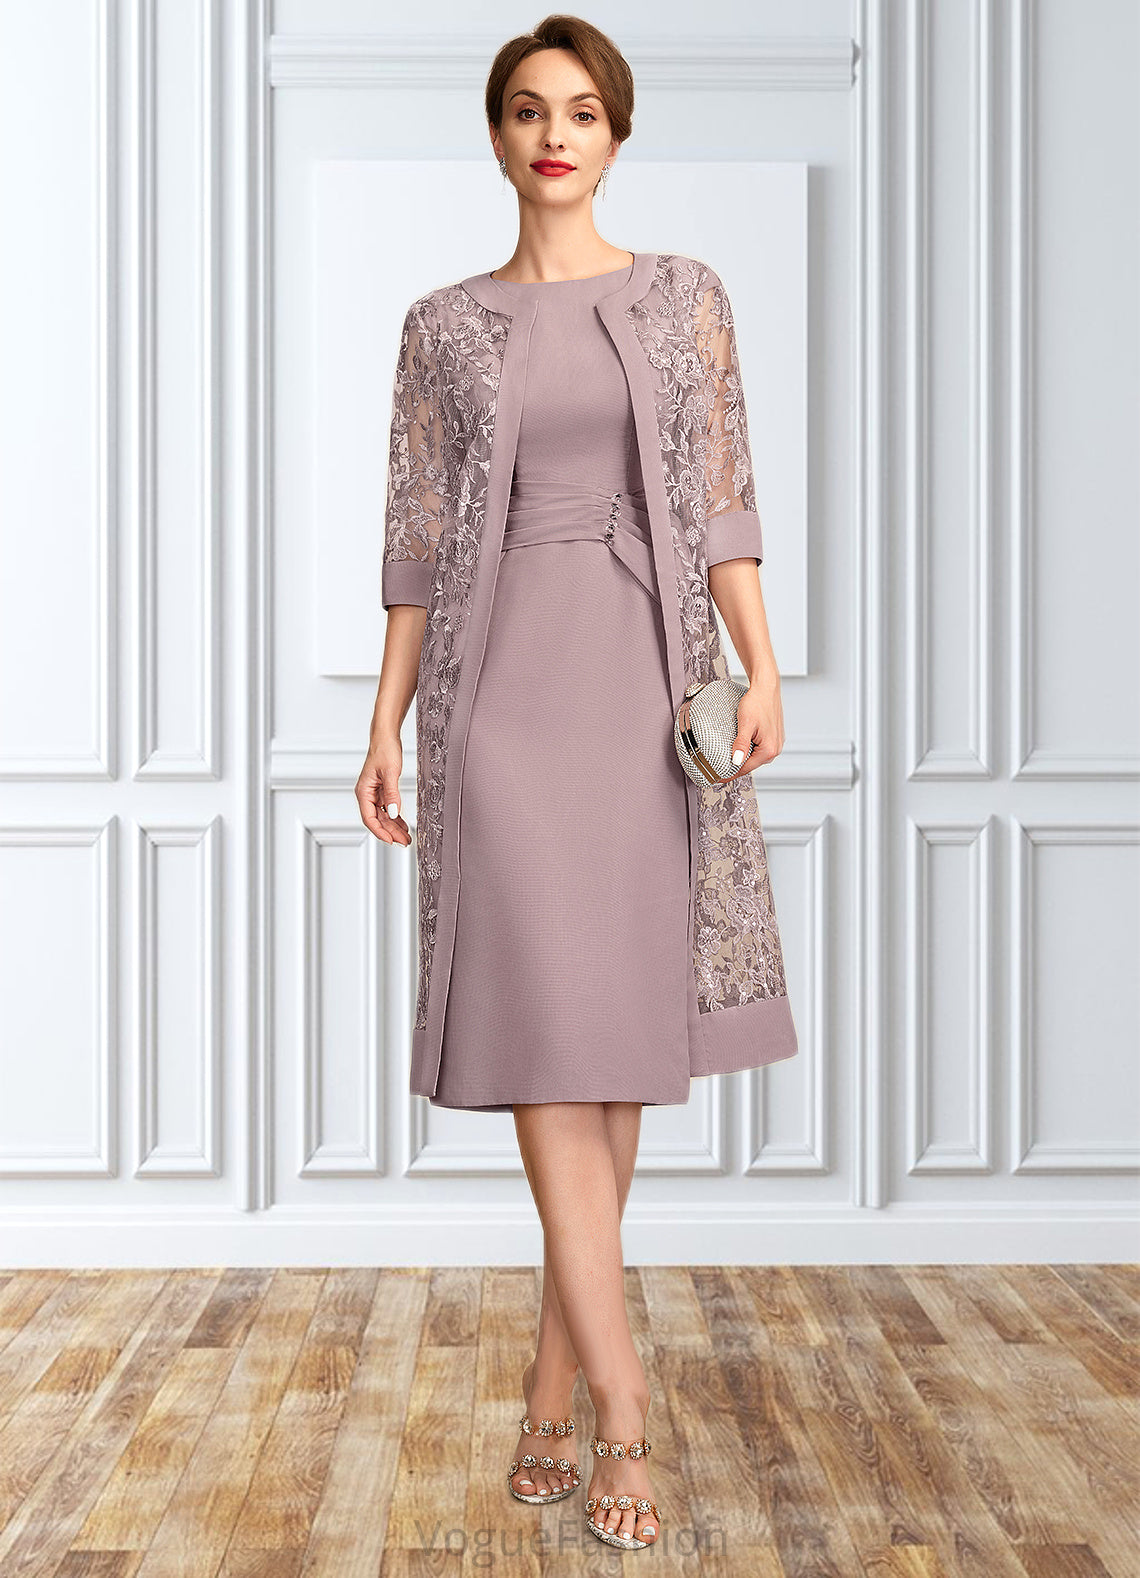 Emma Sheath/Column Scoop Neck Knee-Length Chiffon Mother of the Bride Dress With Ruffle Sequins DK126P0015023